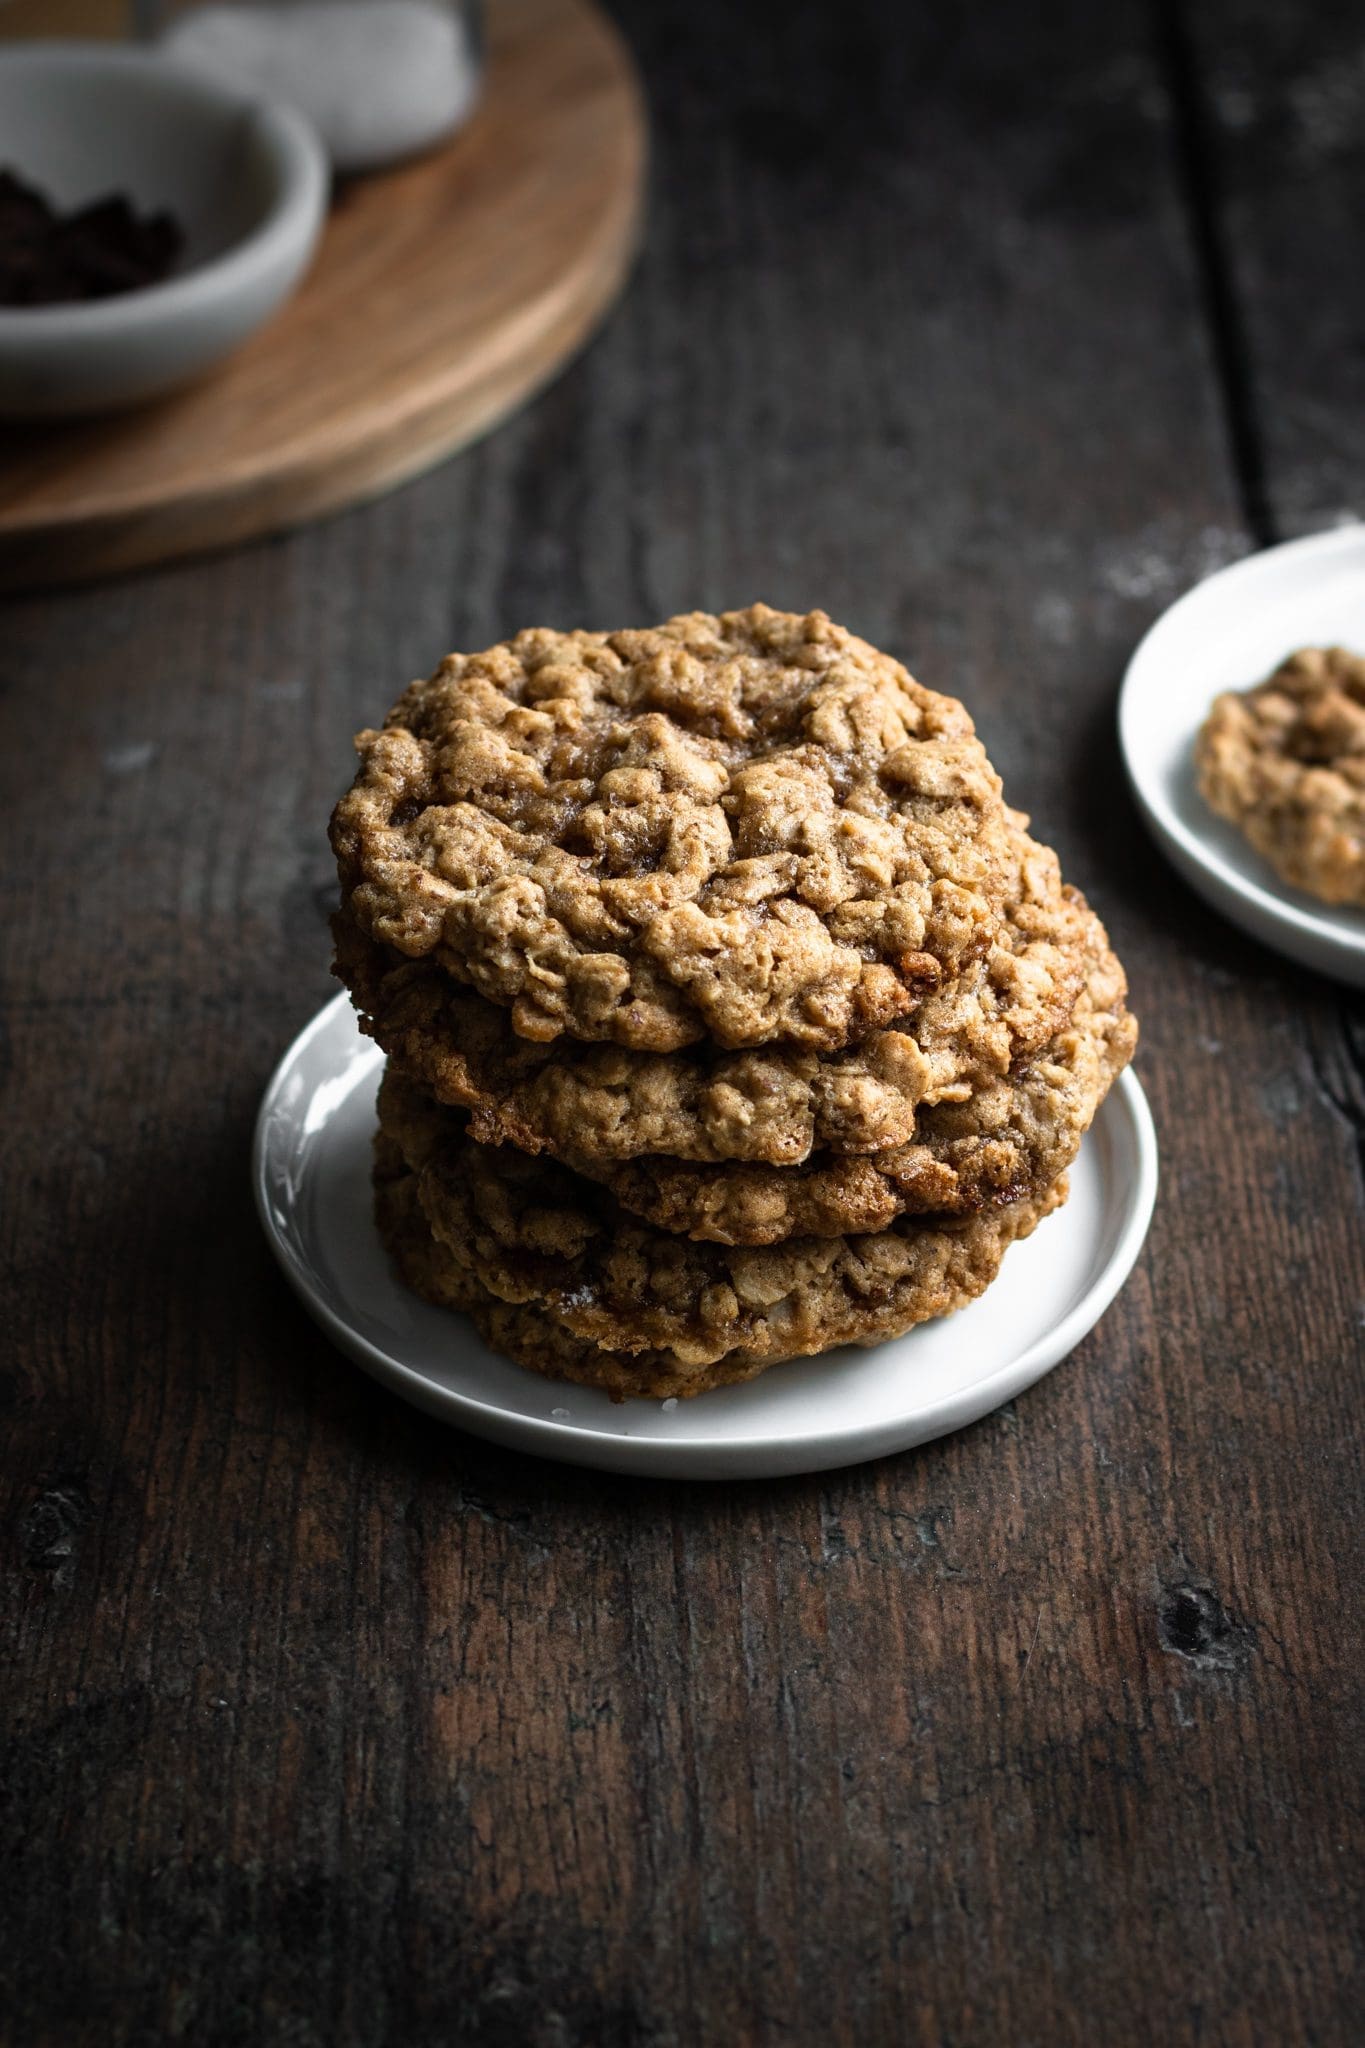 Top 10 Recipes of 2021 - oatmeal cookies